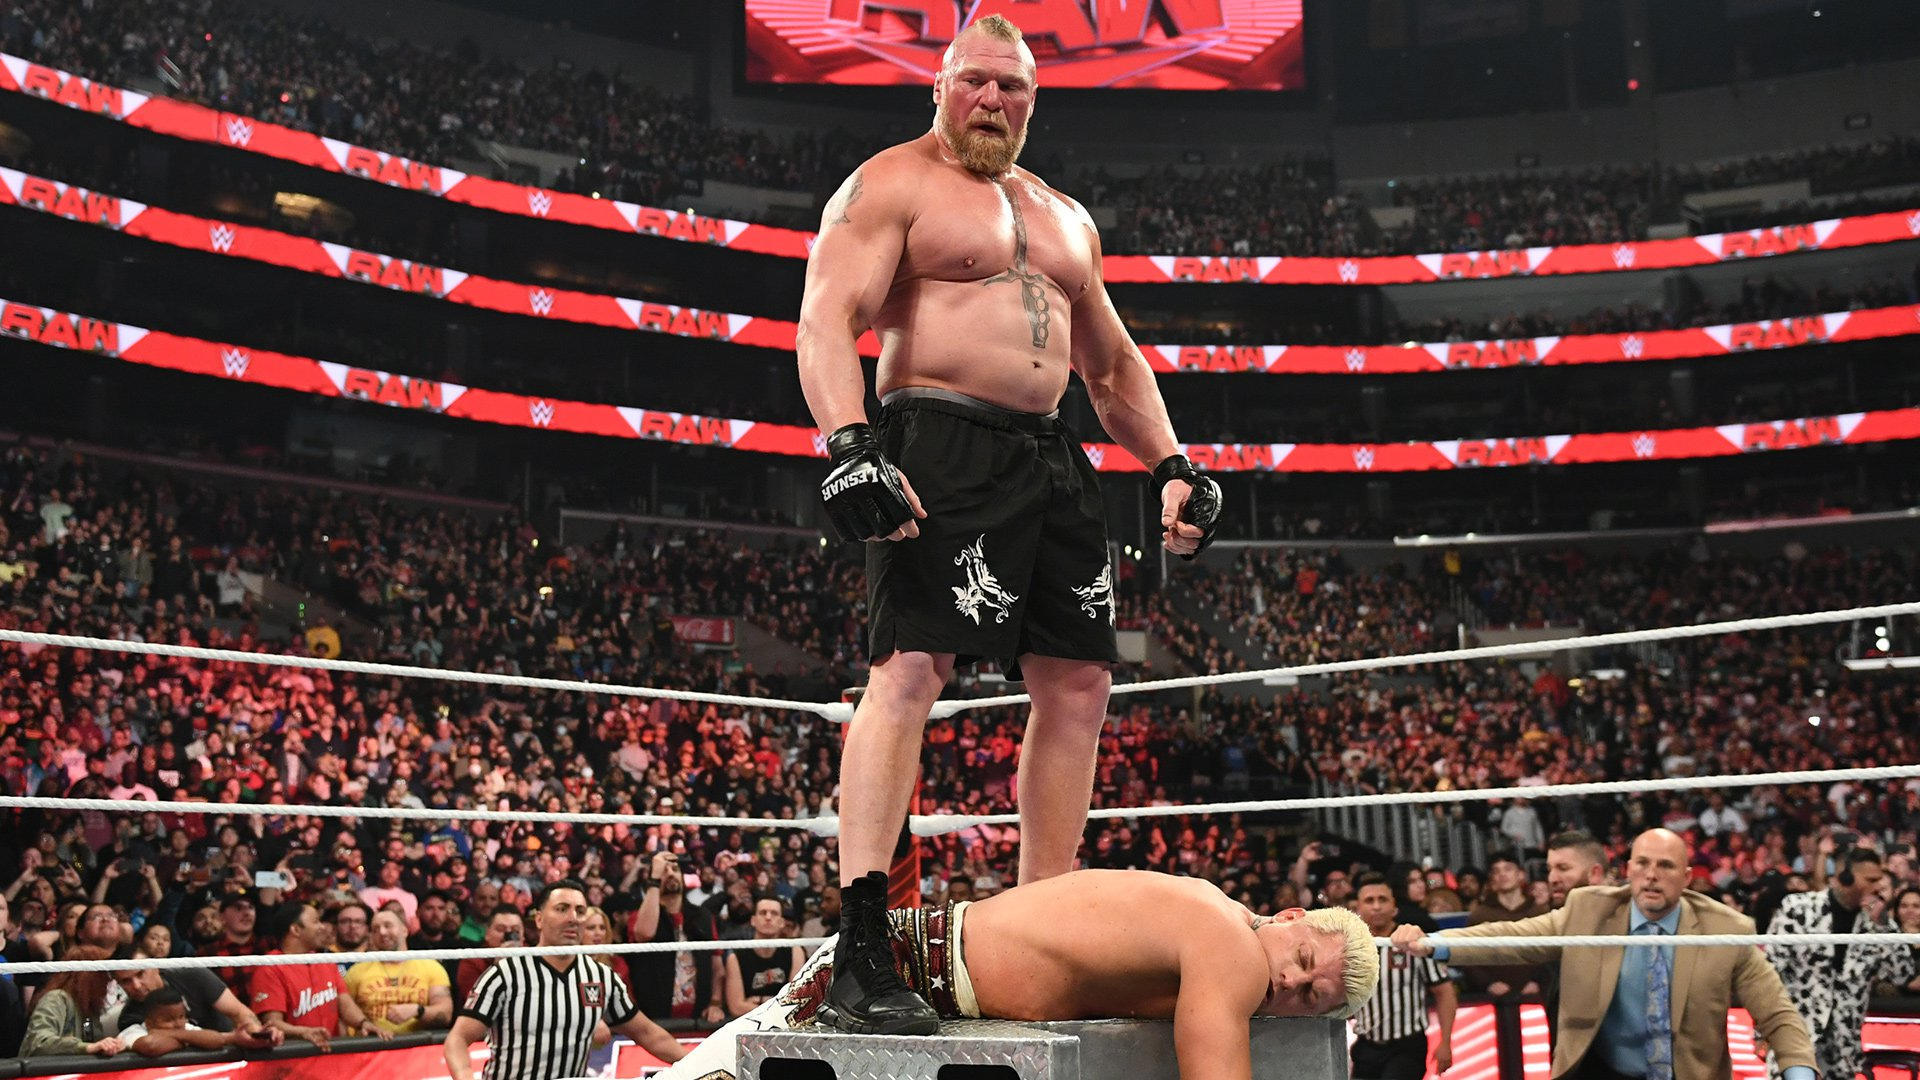 WWE WrestleMania 39 Results: Winners And Grades On Night 2